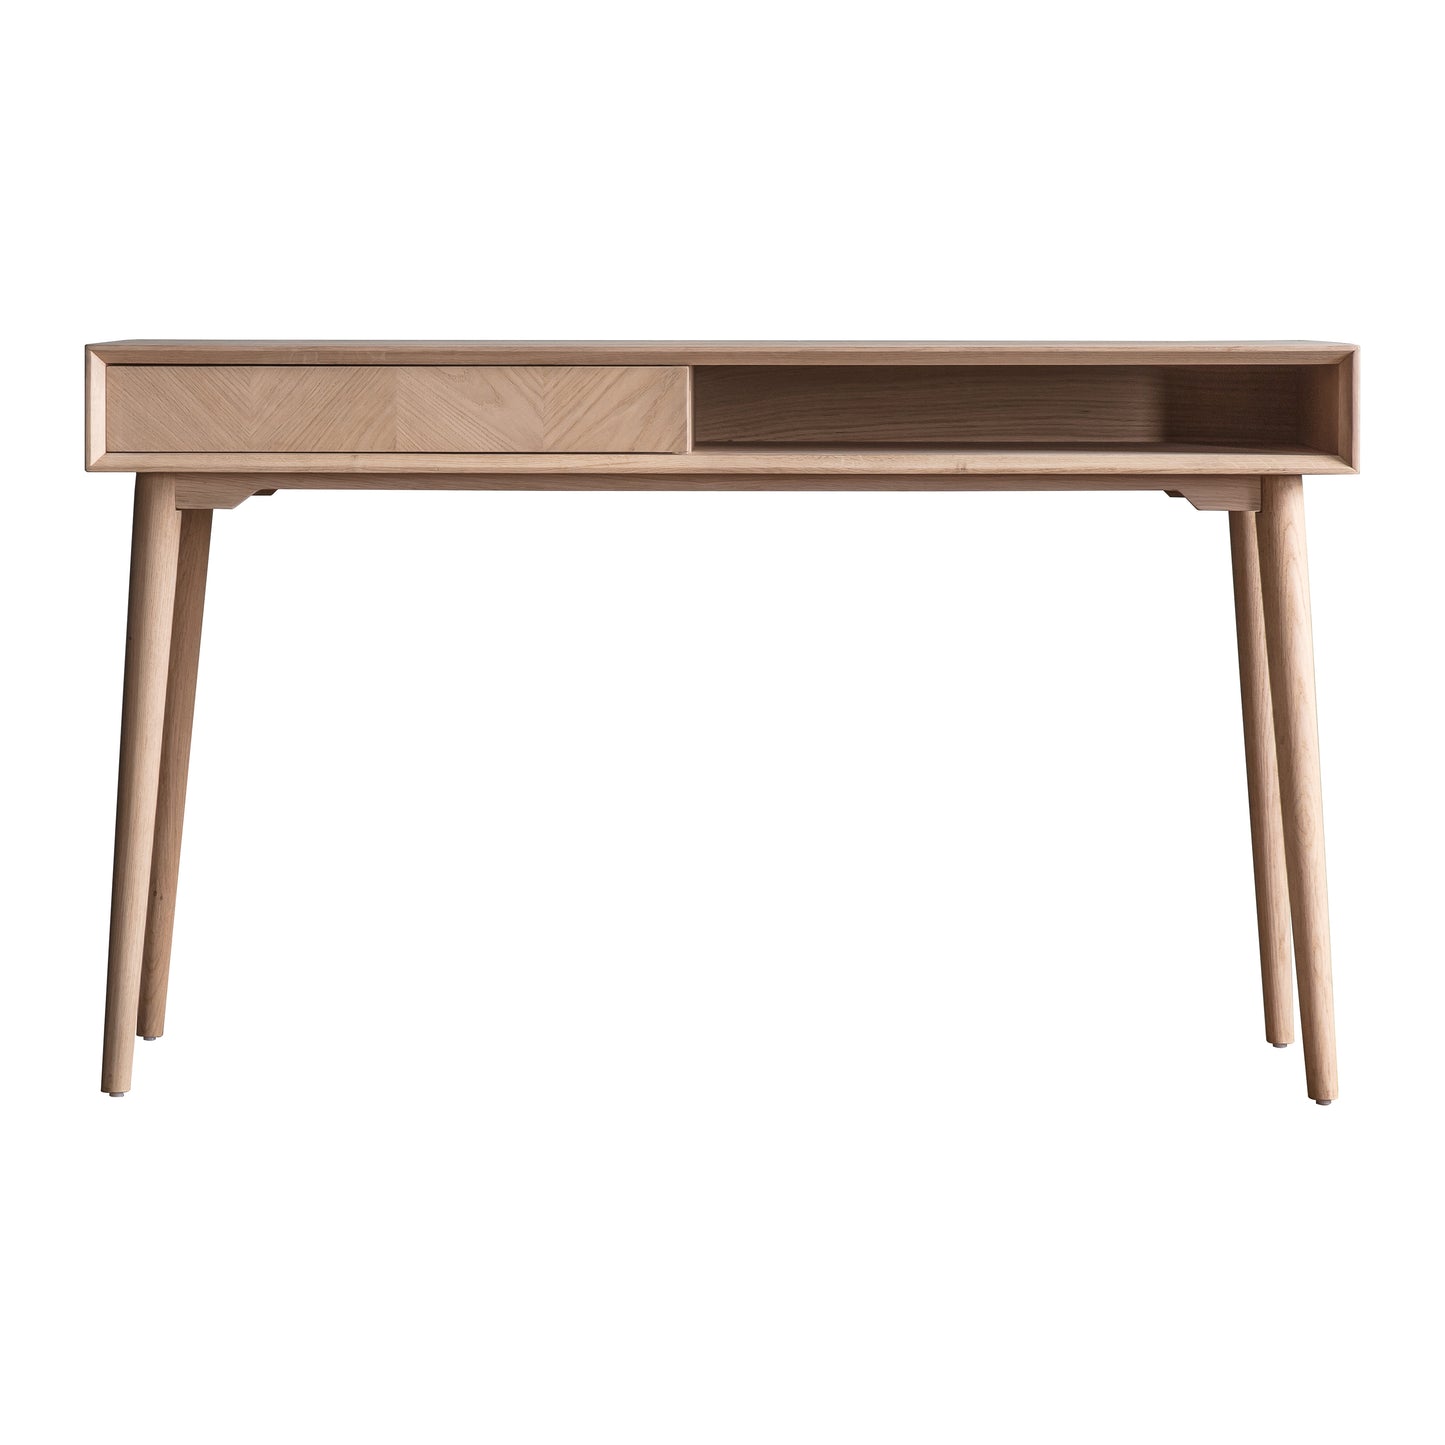 A Tristford 1 Drawer Desk 1300x500x760mm by Kikiathome.co.uk, offering home furniture with a drawer and two legs.